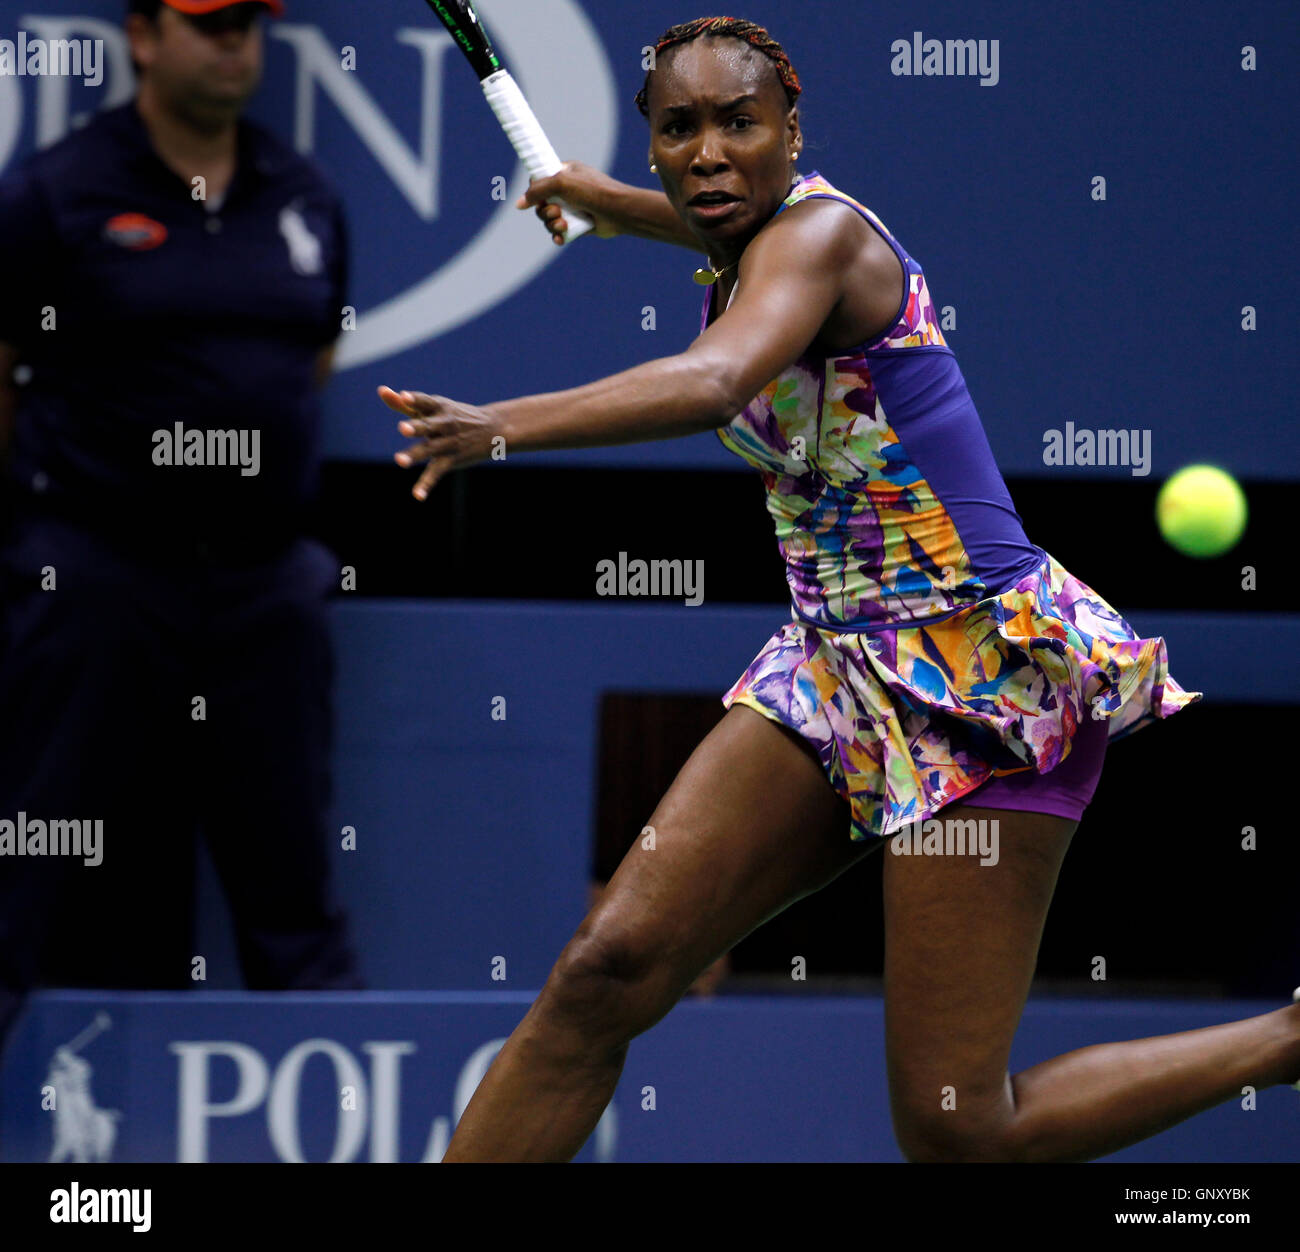 New York, United States. 01st Sep, 2016. Venus Williams in action during her second round match against Julia Goerges of Germany at the United States Open Tennis Championships at Flushing Meadows, New York on Thursday, September 1st. Credit:  Adam Stoltman/Alamy Live News Stock Photo